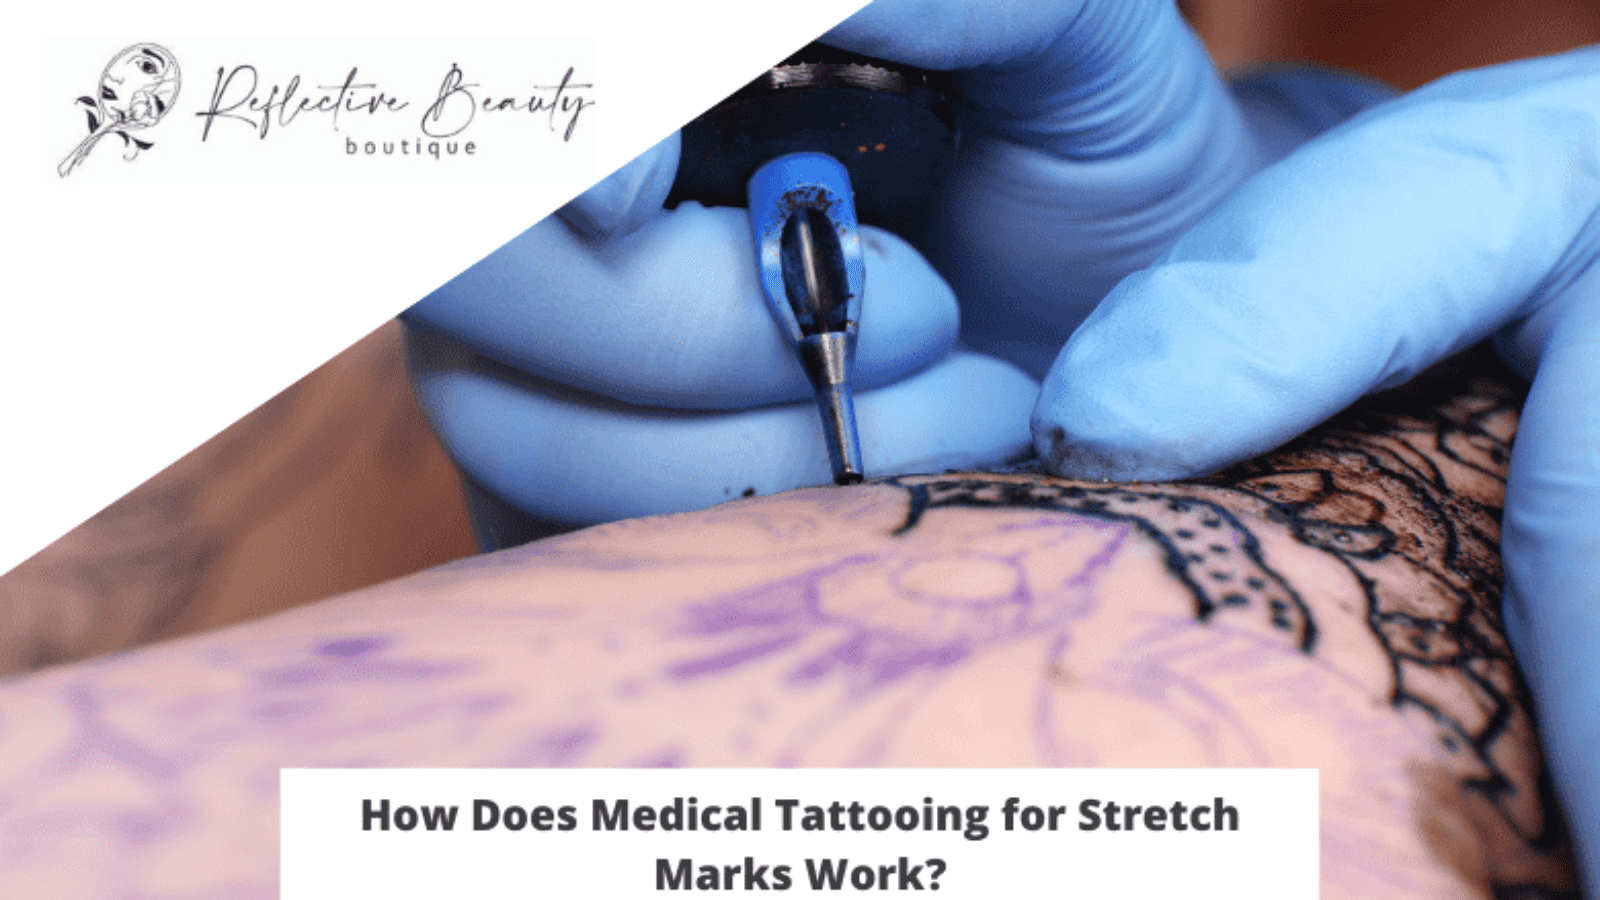 Doctors Use Tattoos to Mark the Spot for Surgery